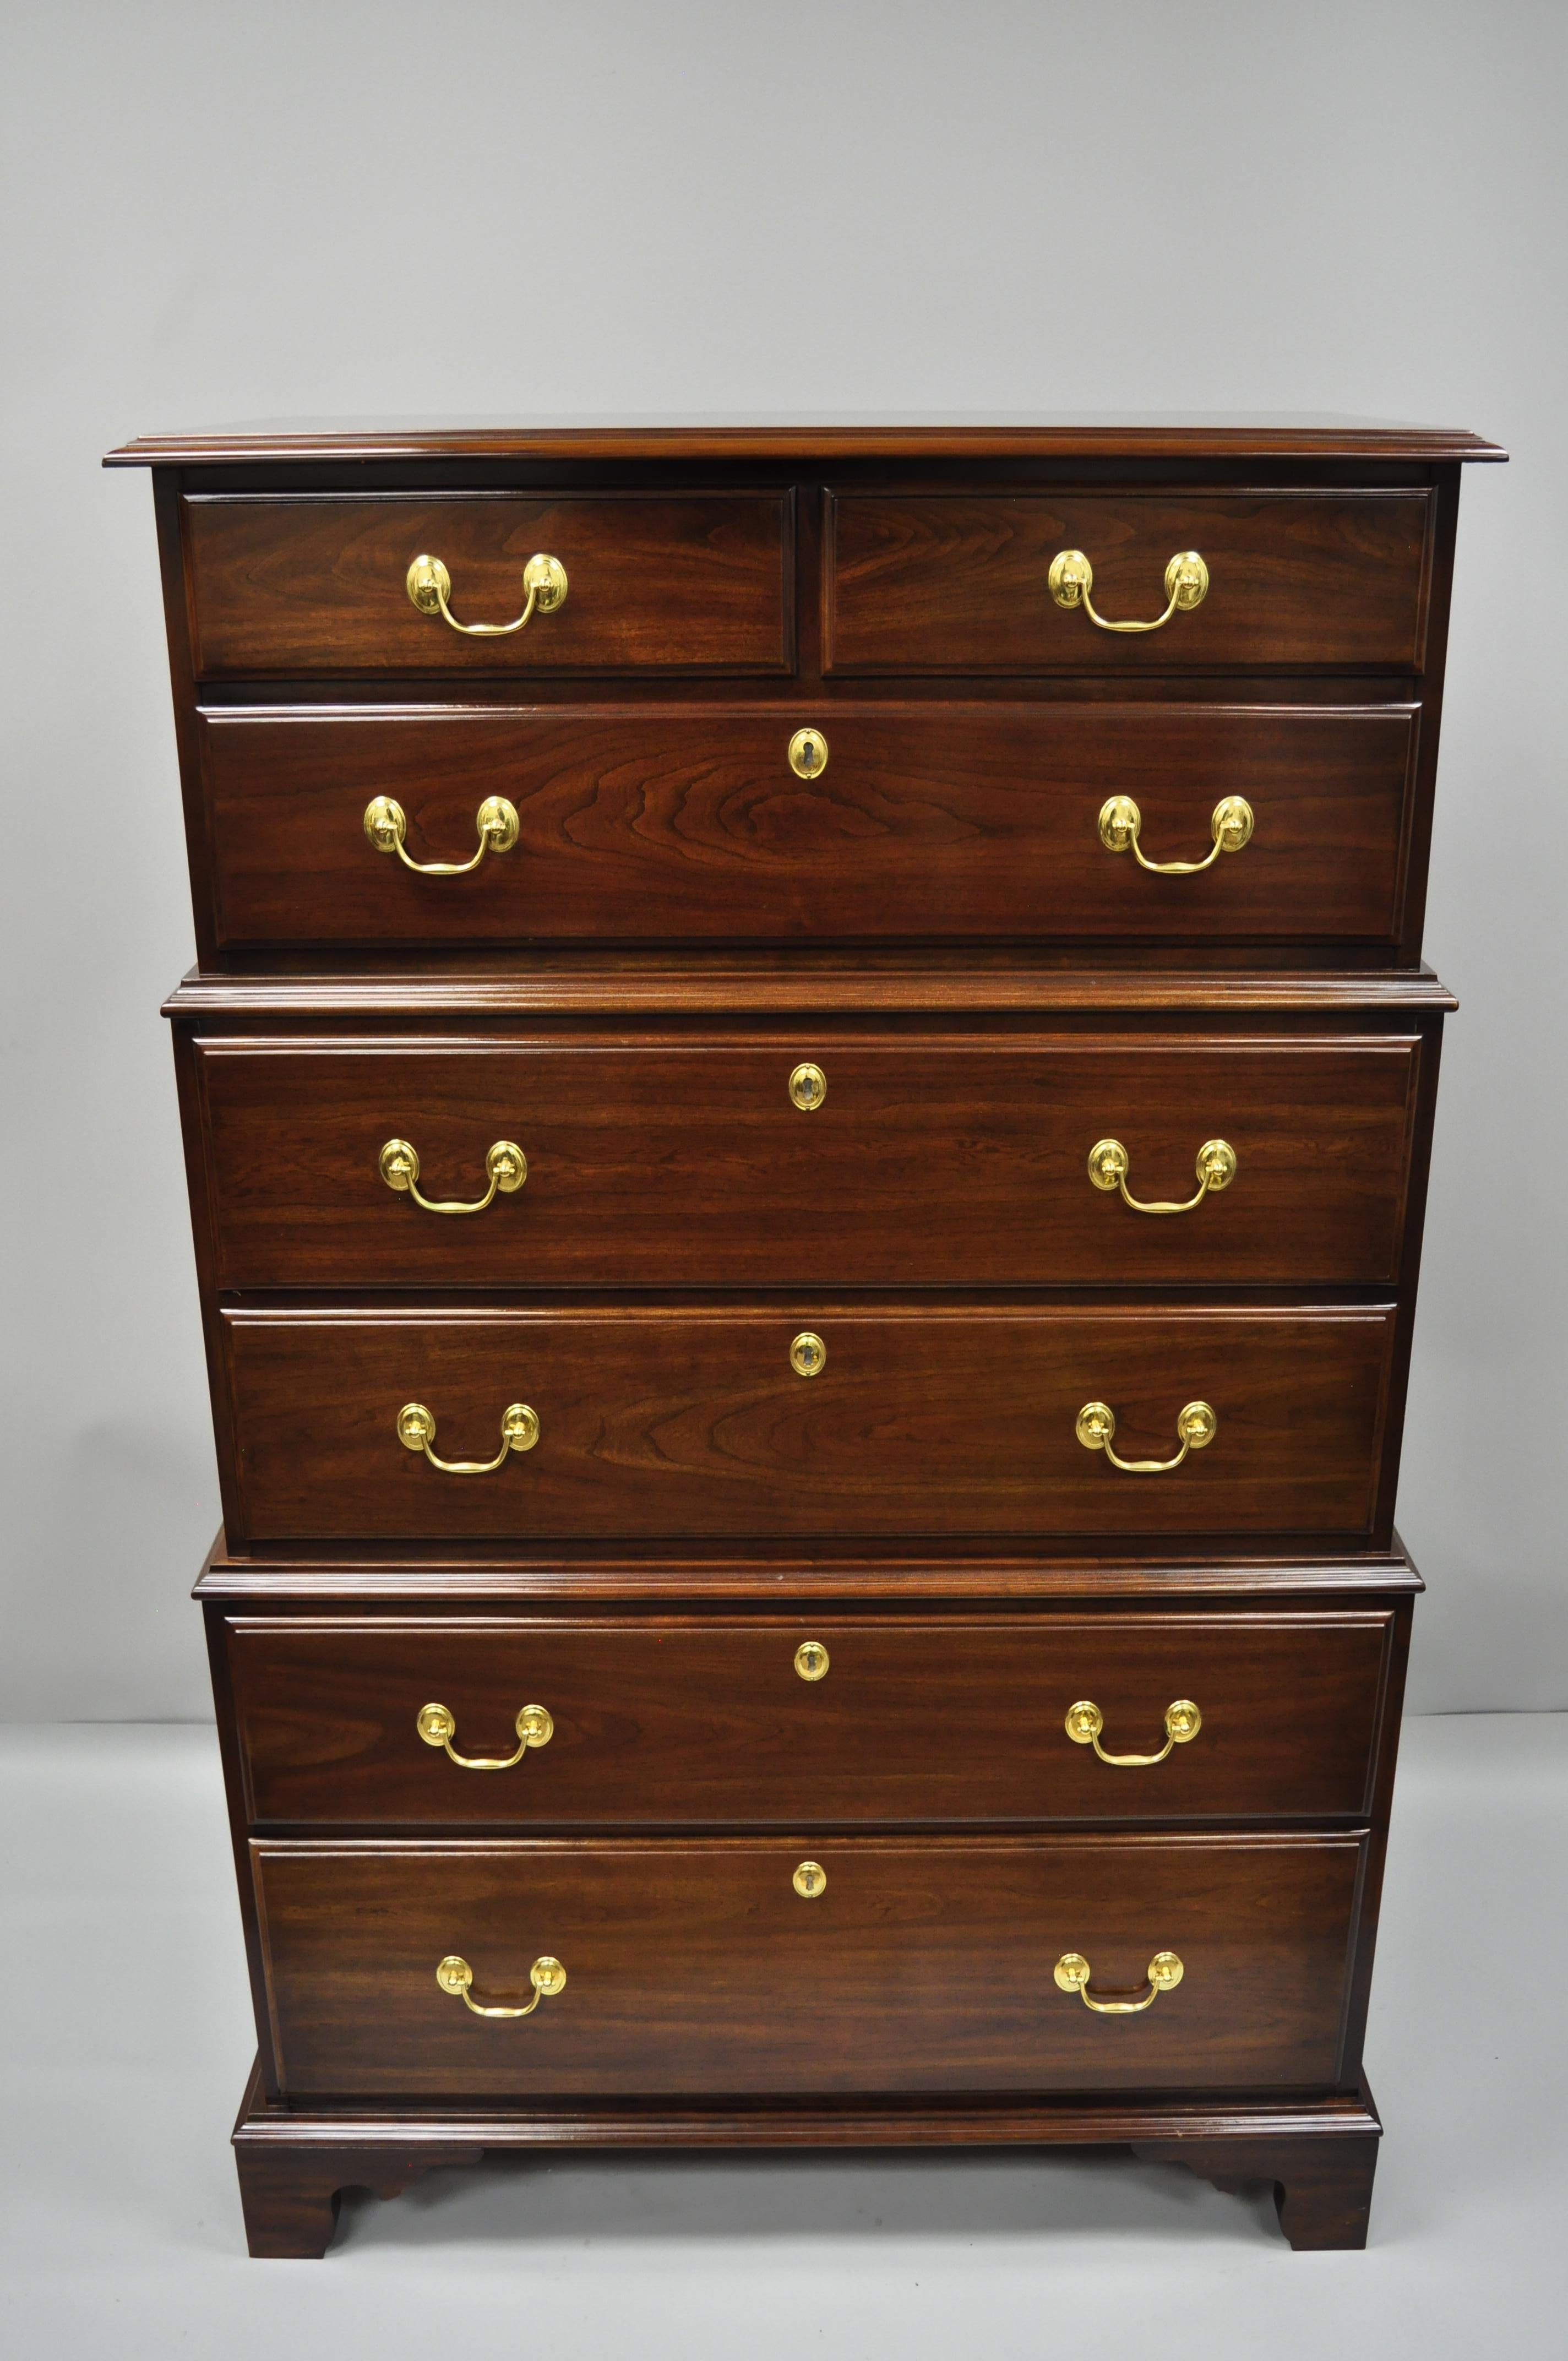 High quality Harden triple chest on chest cherry dresser with side handles. Item features solid wood construction, beautiful wood grain, original Harden stamp, seven dovetailed drawers, solid brass hardware, and quality American craftsmanship, circa